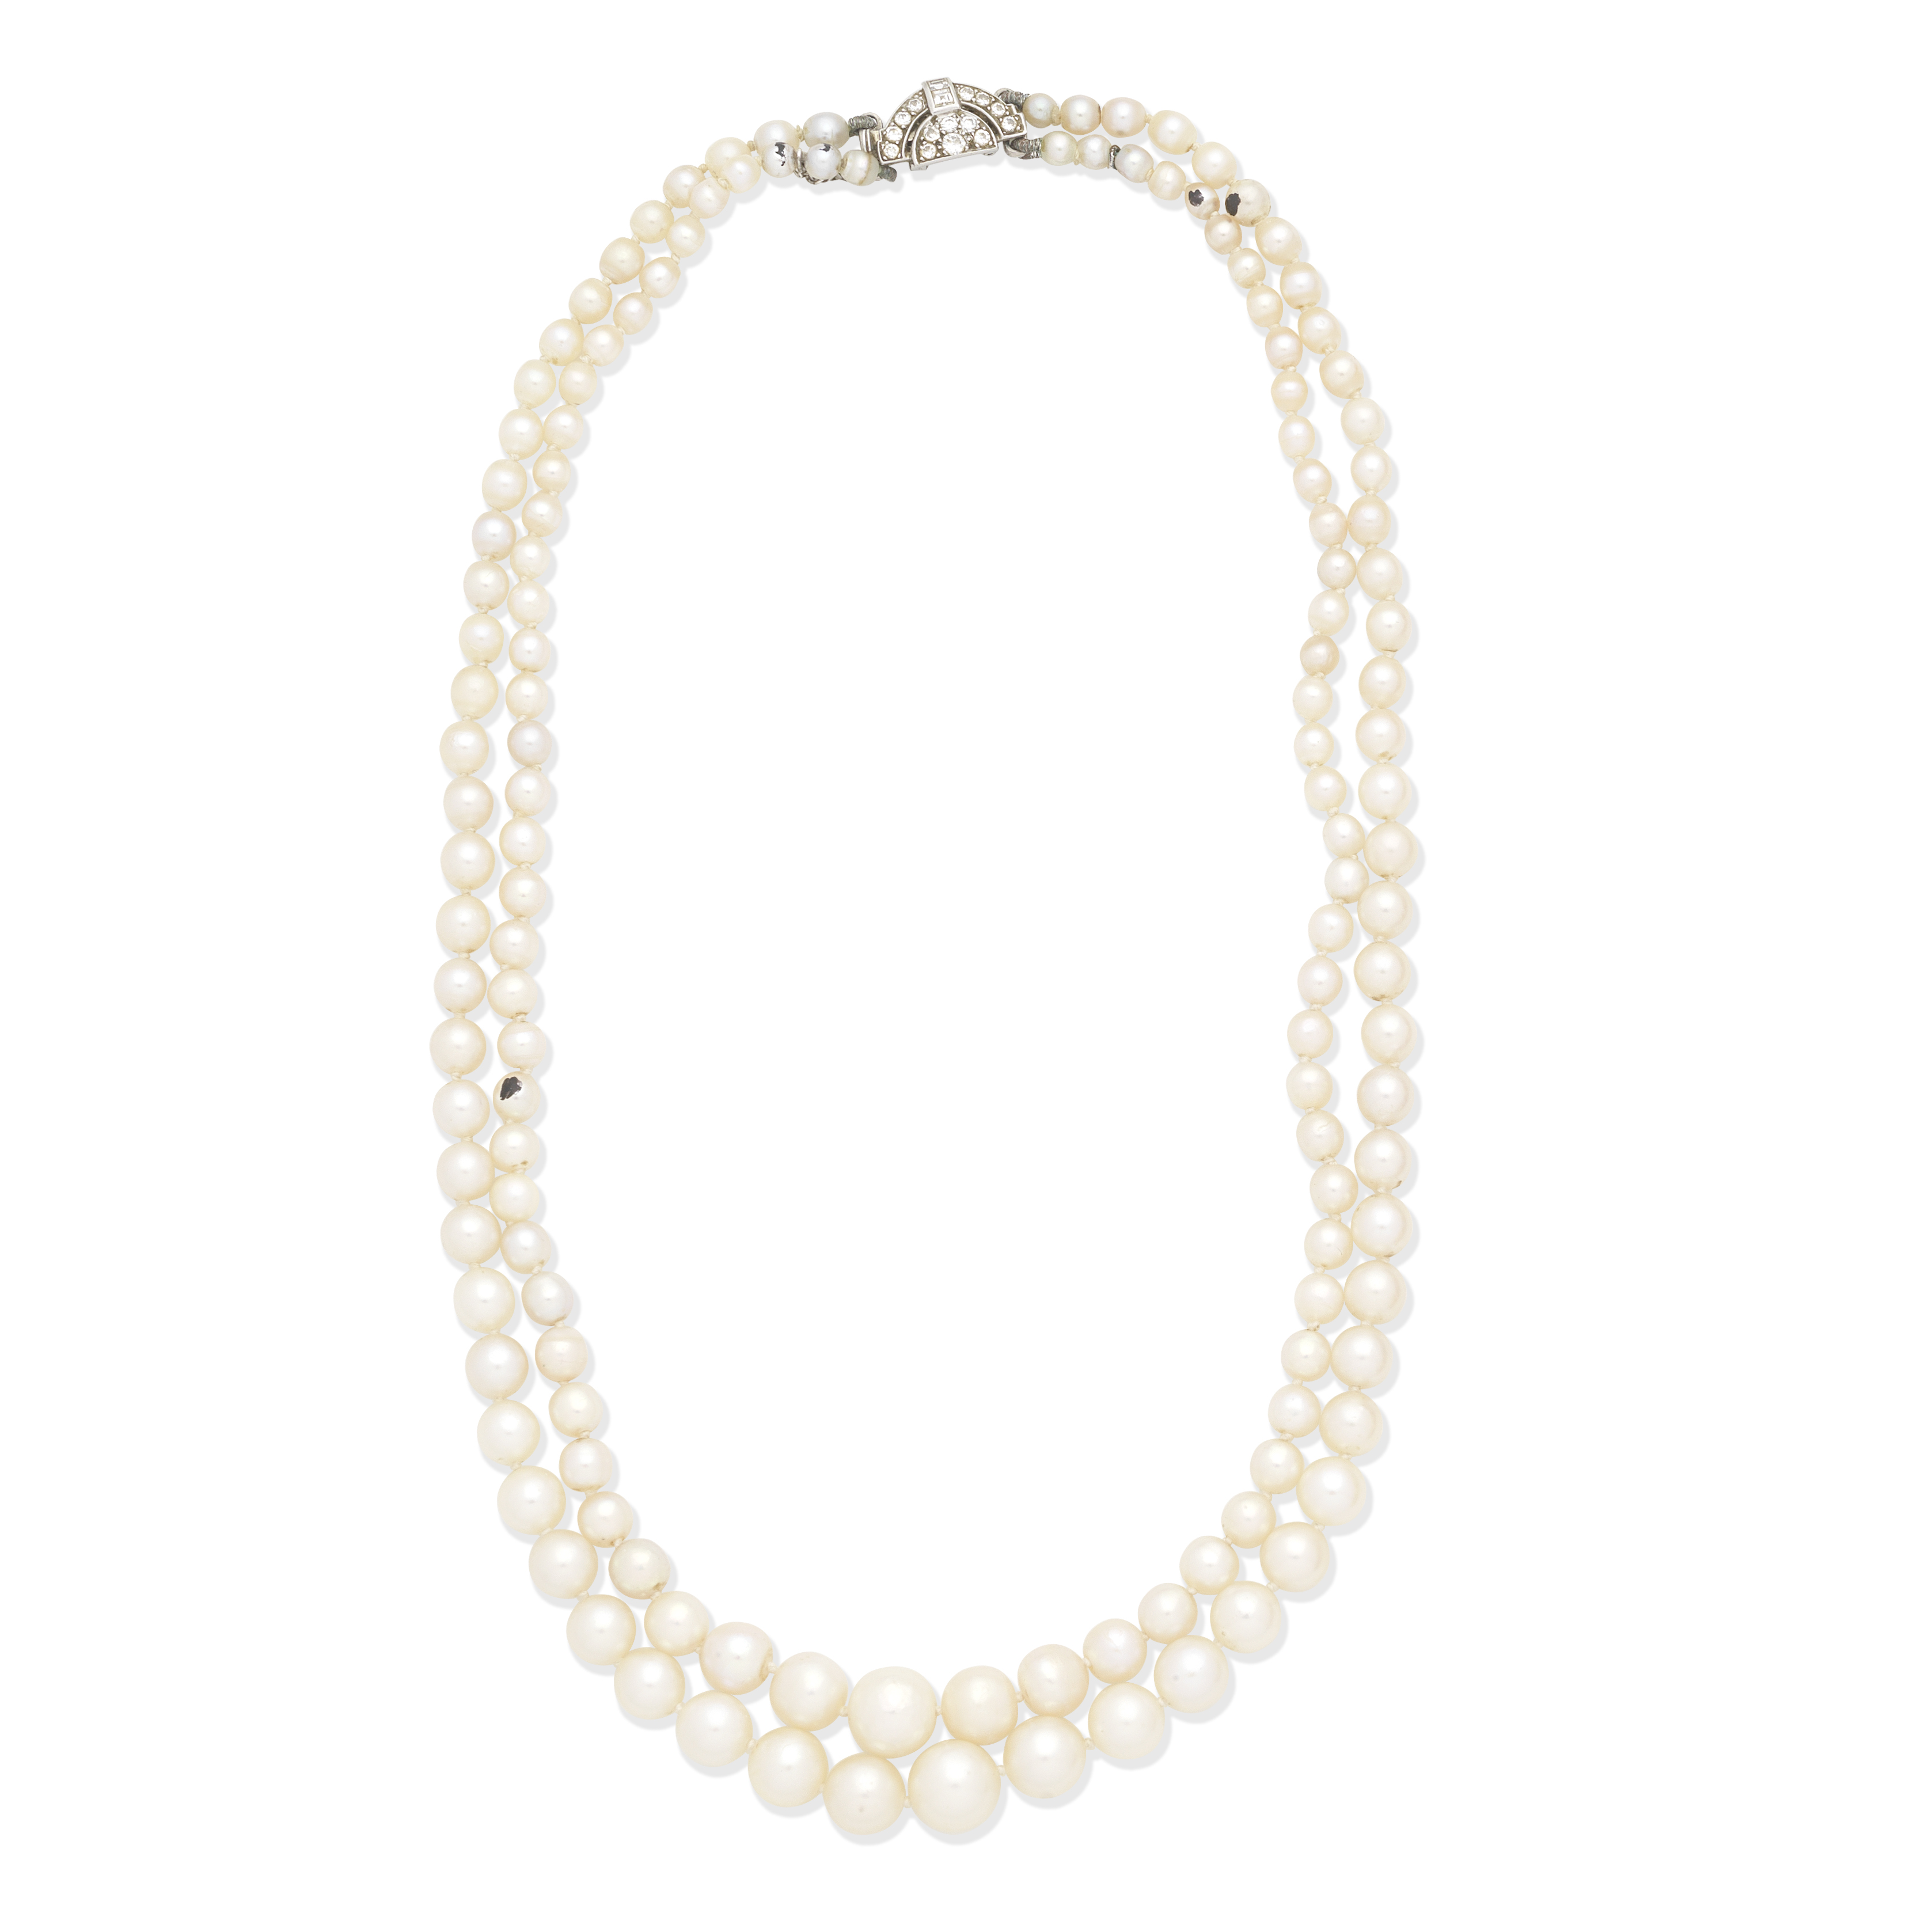 NATURAL AND CULTURED PEARL NECKLACE